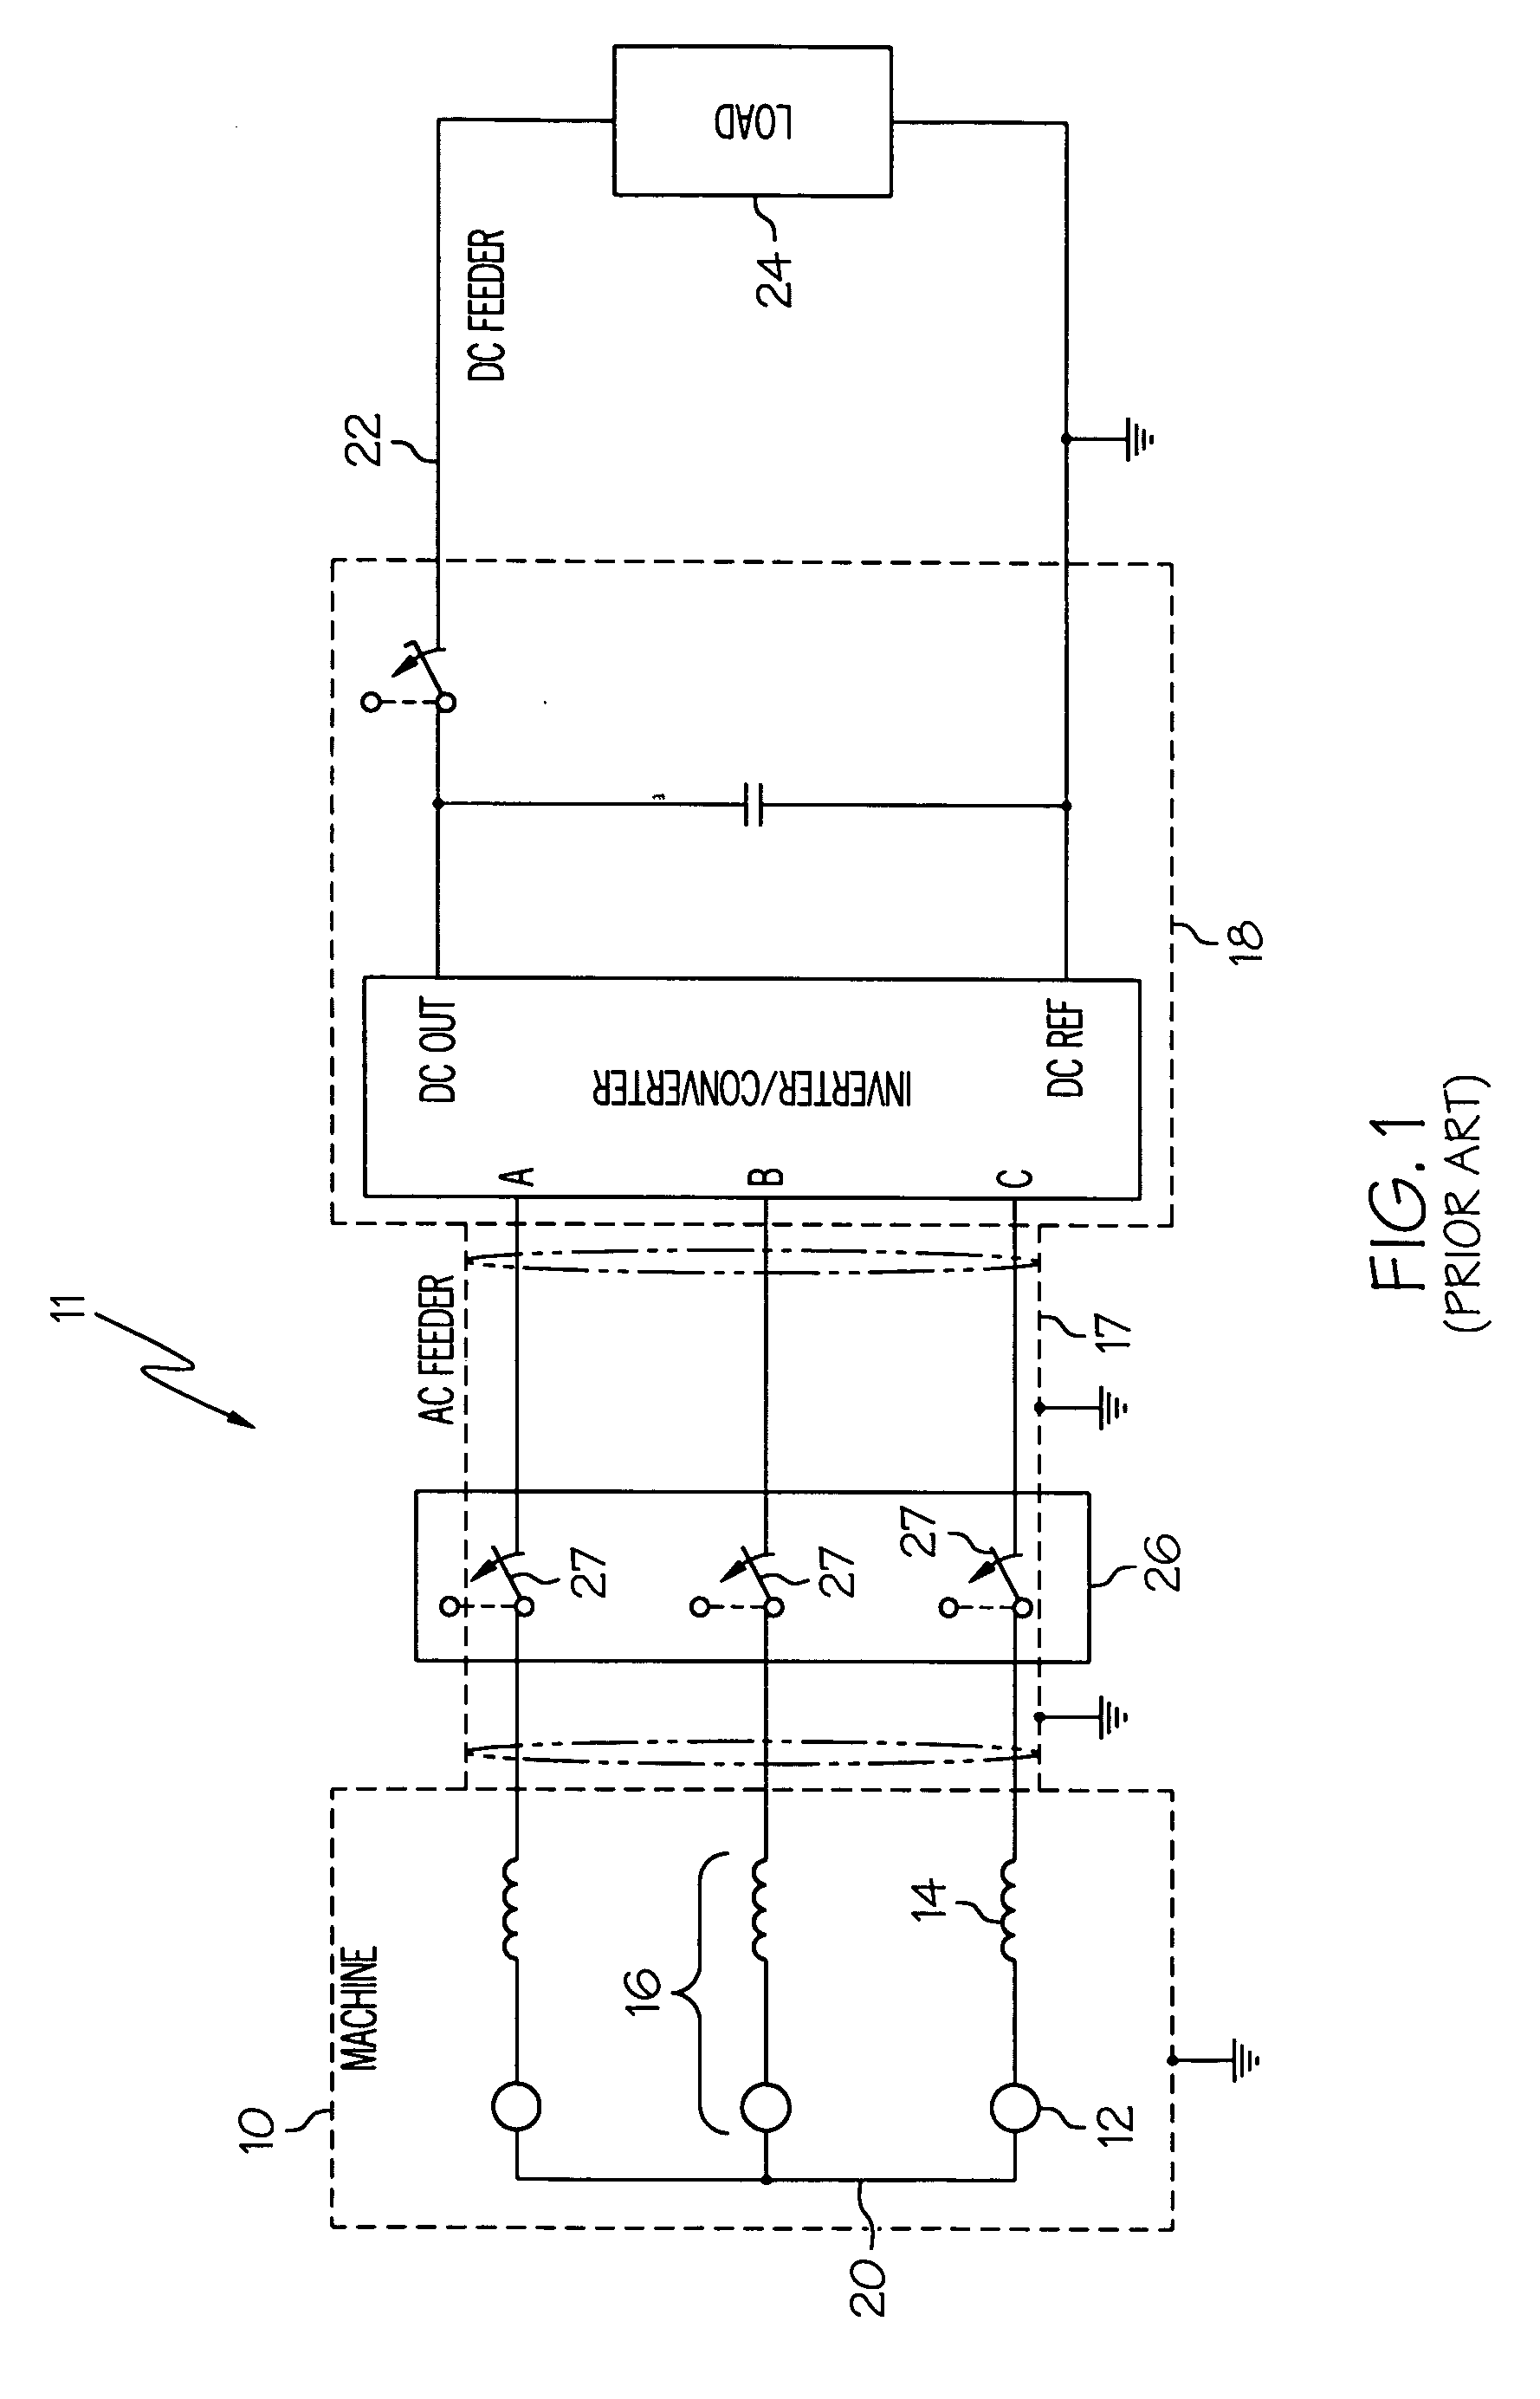 System and method for fault protection for permanent magnet machines